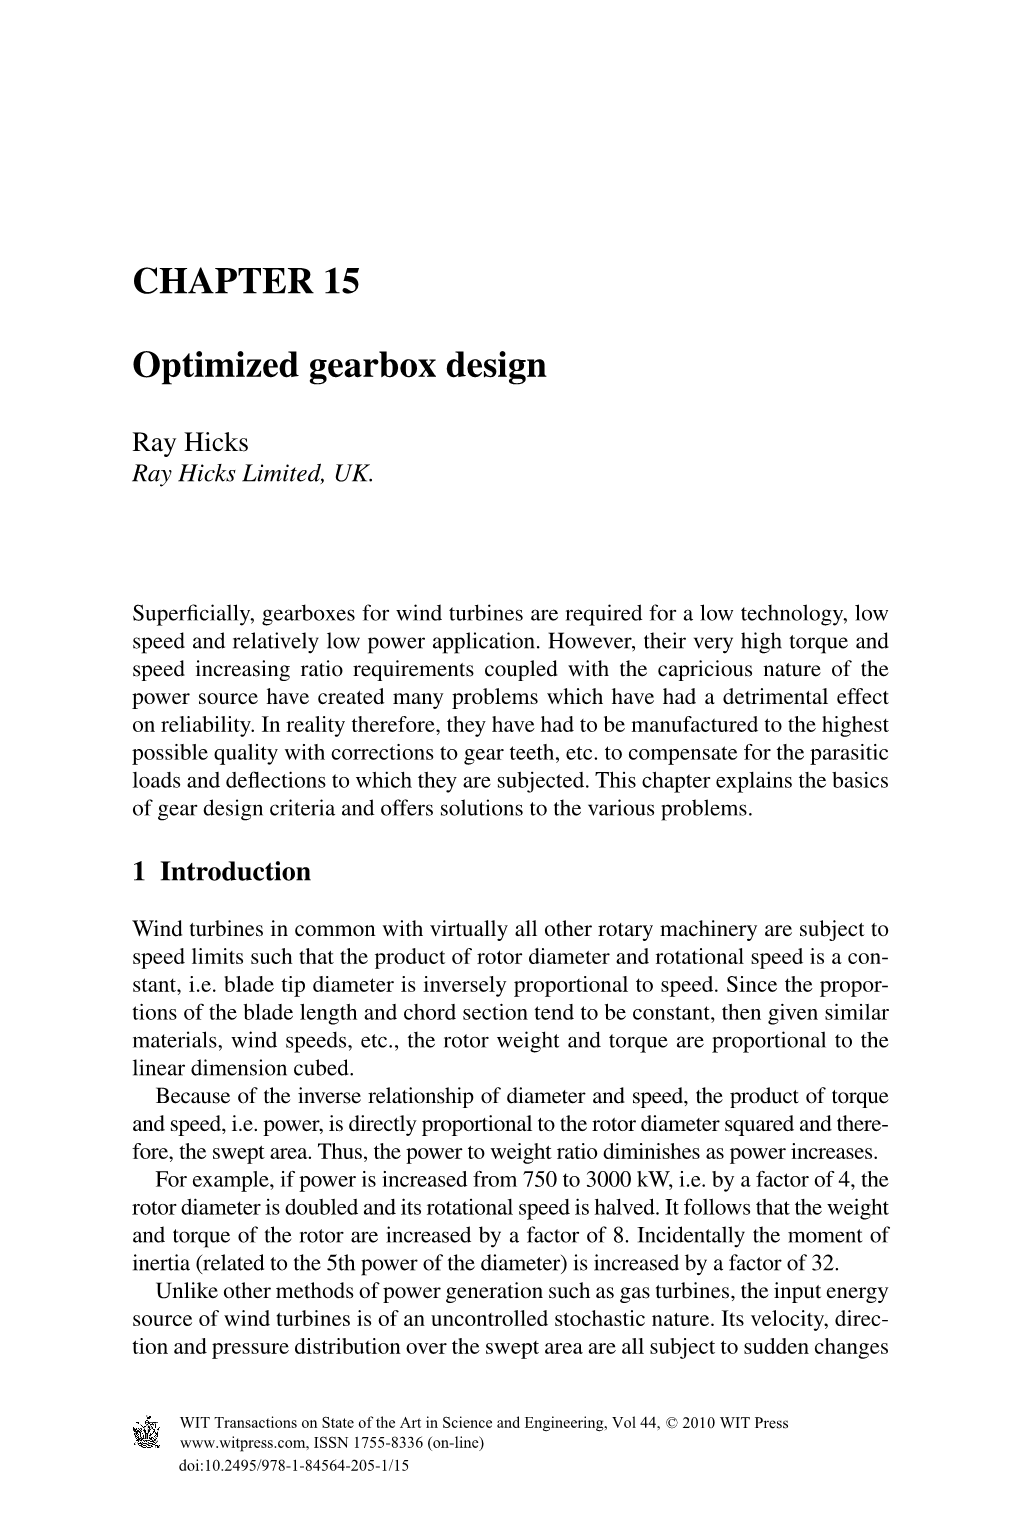 CHAPTER 15 Optimized Gearbox Design